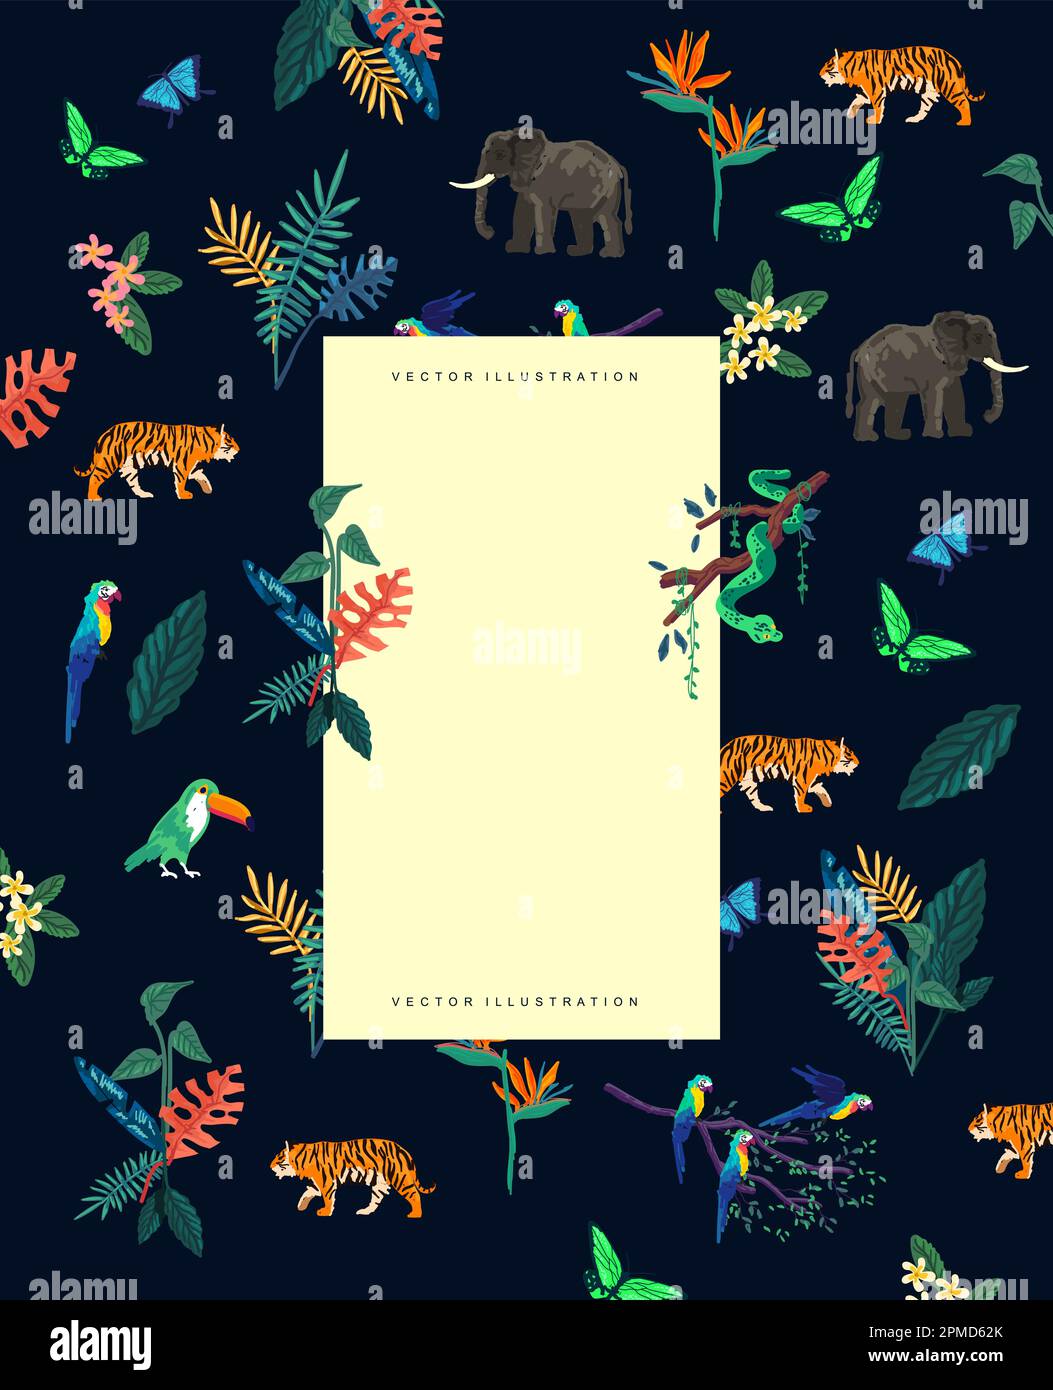 Dark wild rain forest elements and tropical plants with wildlife. Vector illlustration. Stock Vector